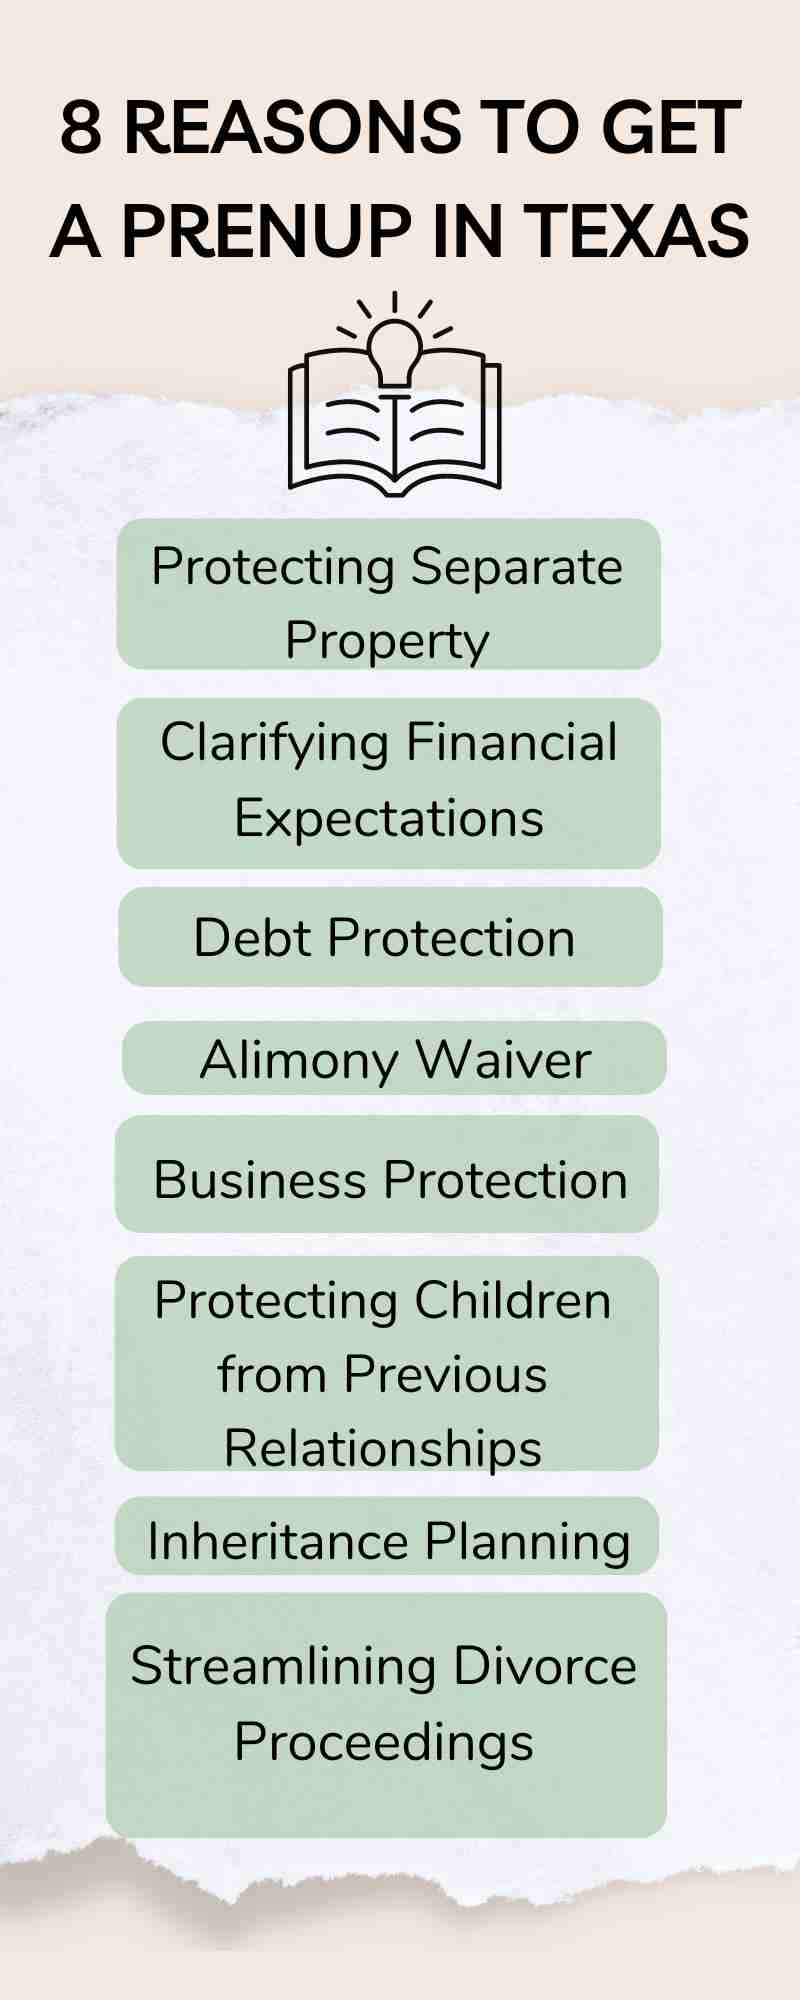 Infographic titled "8 Reasons to Get a Prenup in Texas" listing key insights such as property clarification, debt protection, and simplifying divorce processes.